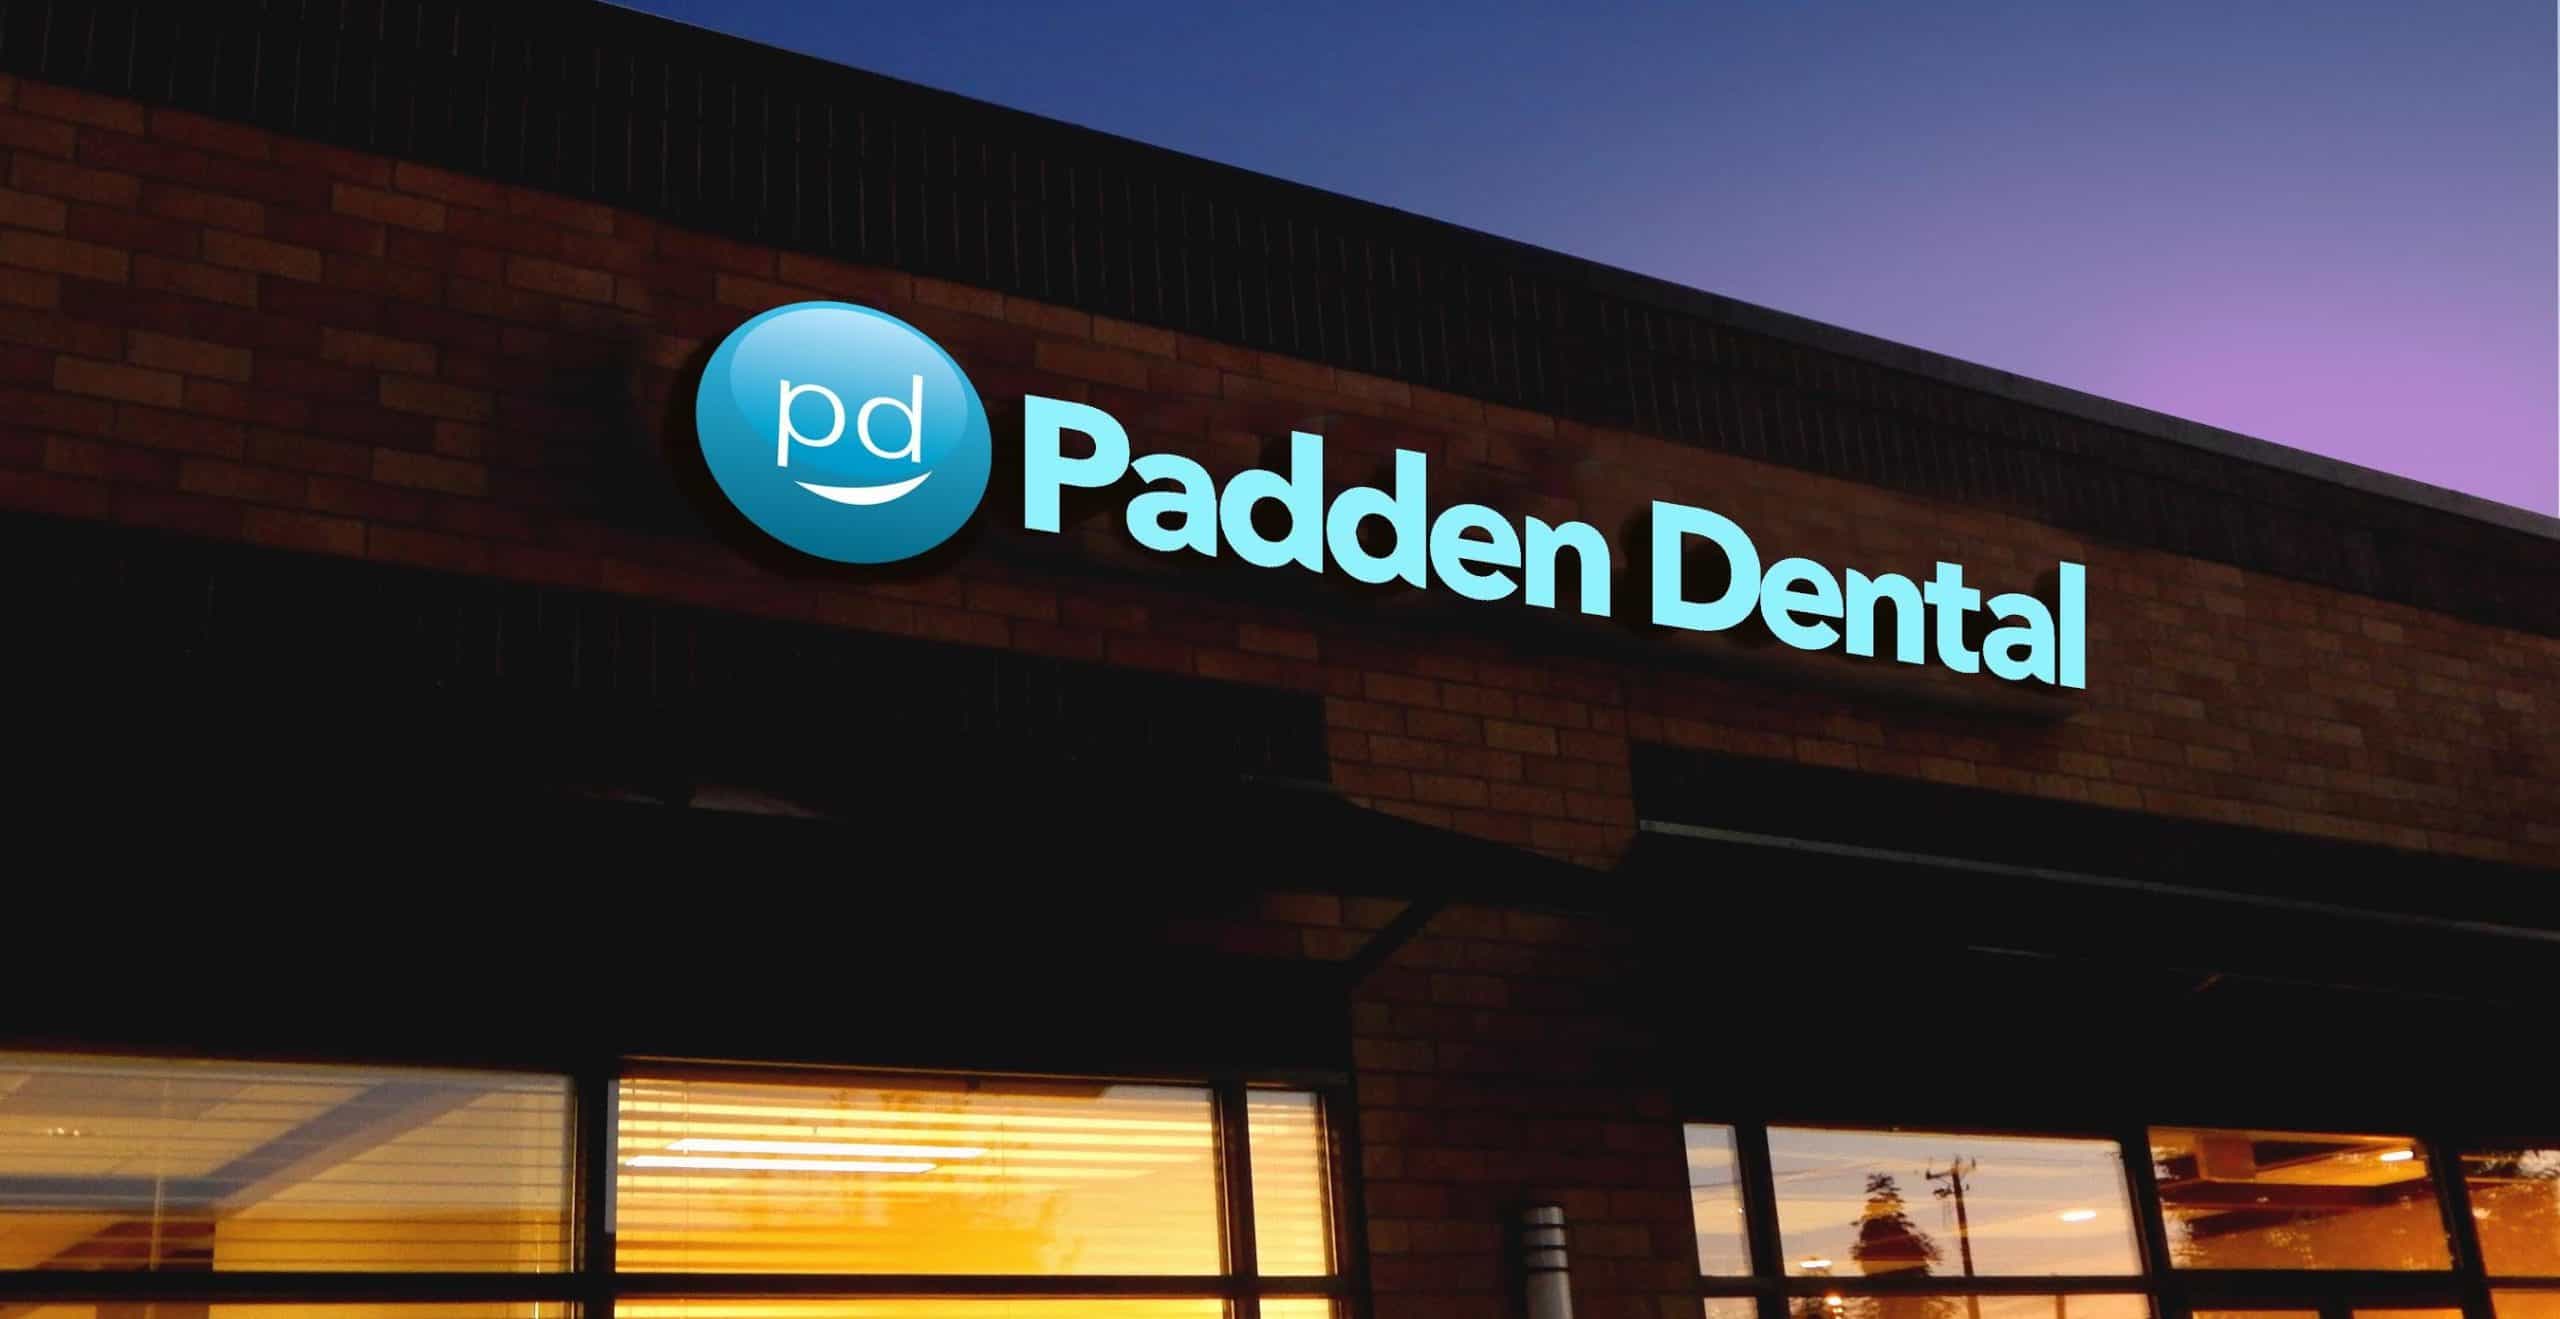 Padden Dental is in the Smiles Business